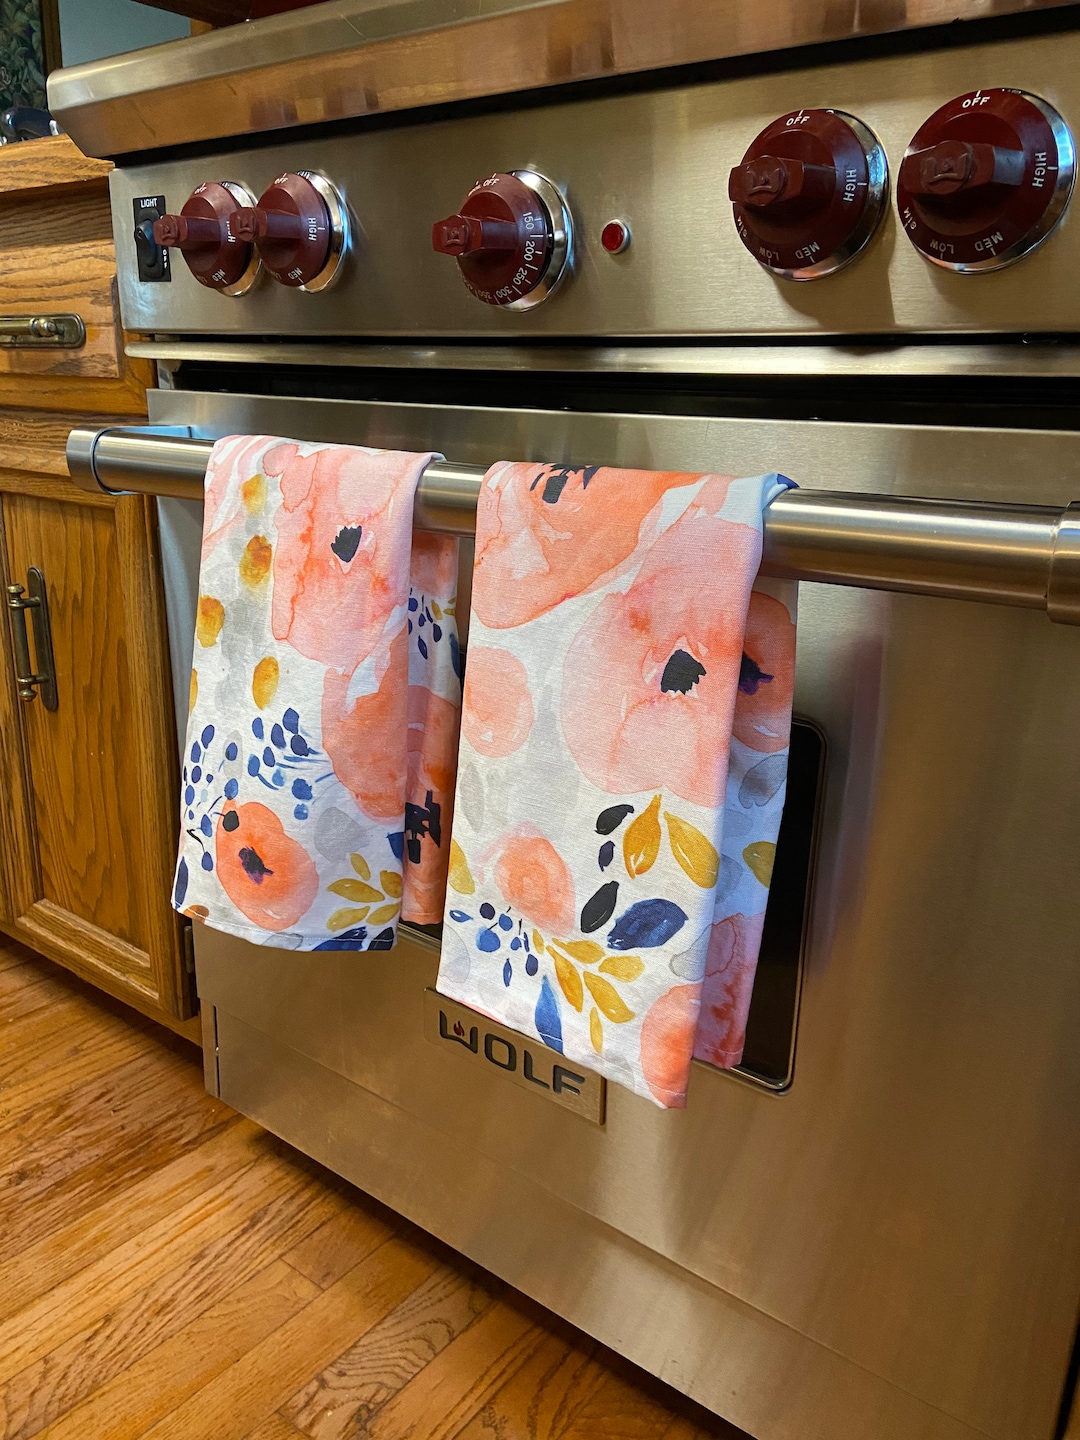 Giftologists - Introducing an artful new take on the kitchen tea towel. 💦  Made from post-consumer recycled materials, these new sustainable 𝗚𝗘𝗢𝗠𝗘𝗧𝗥𝗬  tea towels will be the last tea towel you will